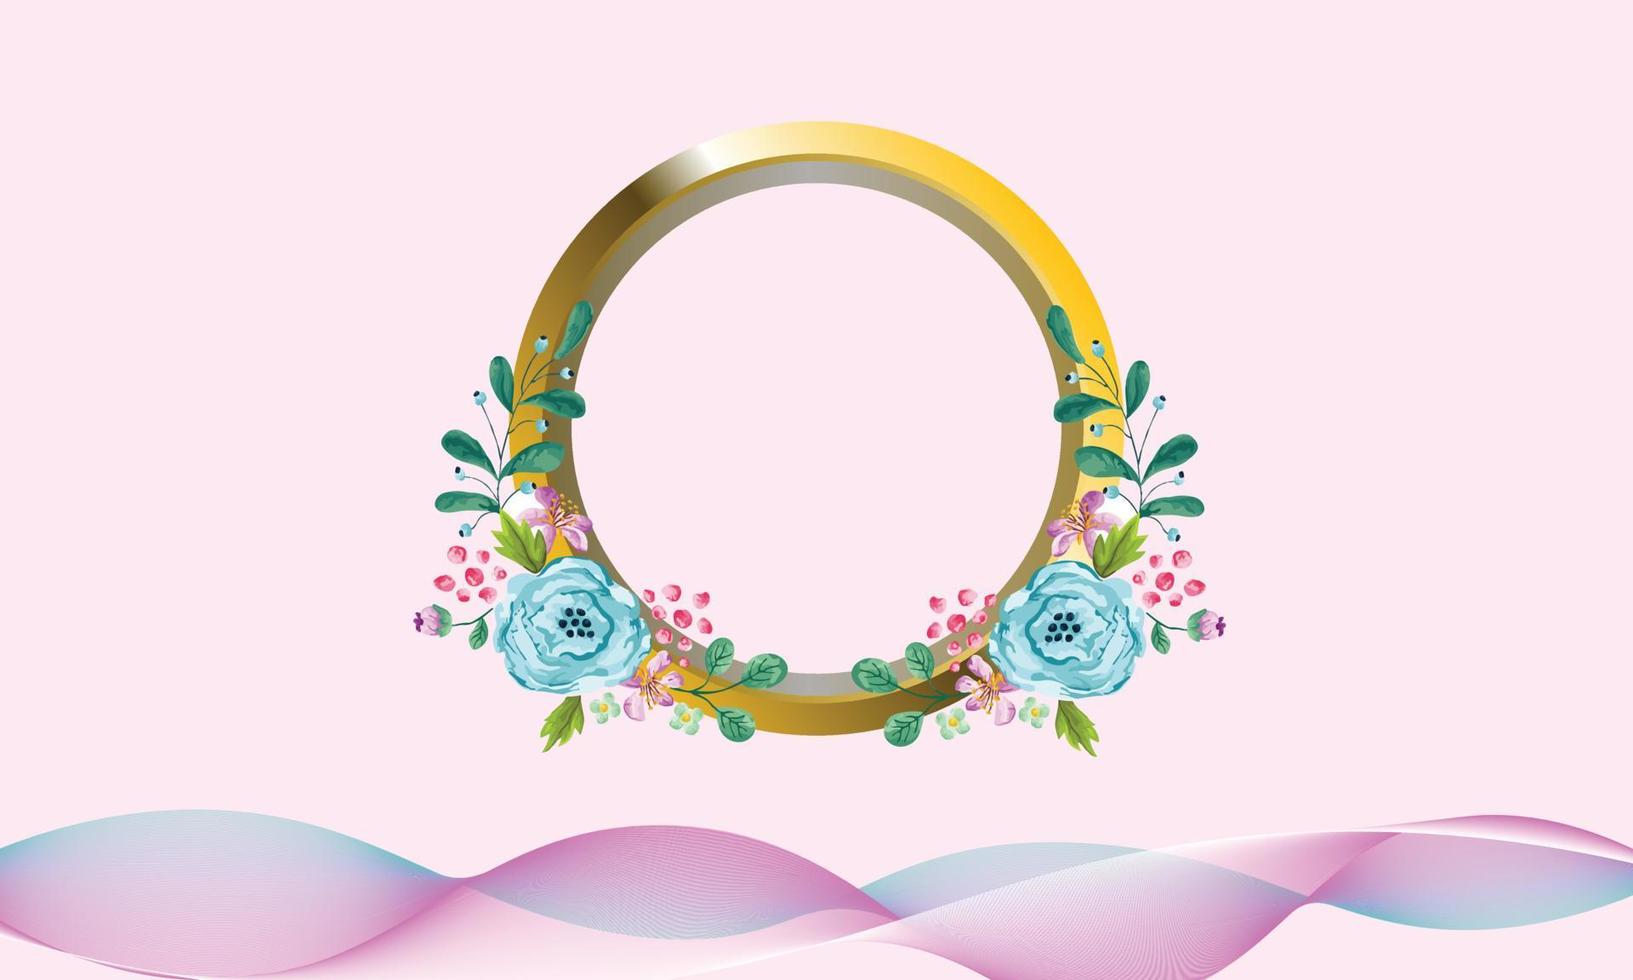 Hand painted watercolor nature flower background with circle frame vector